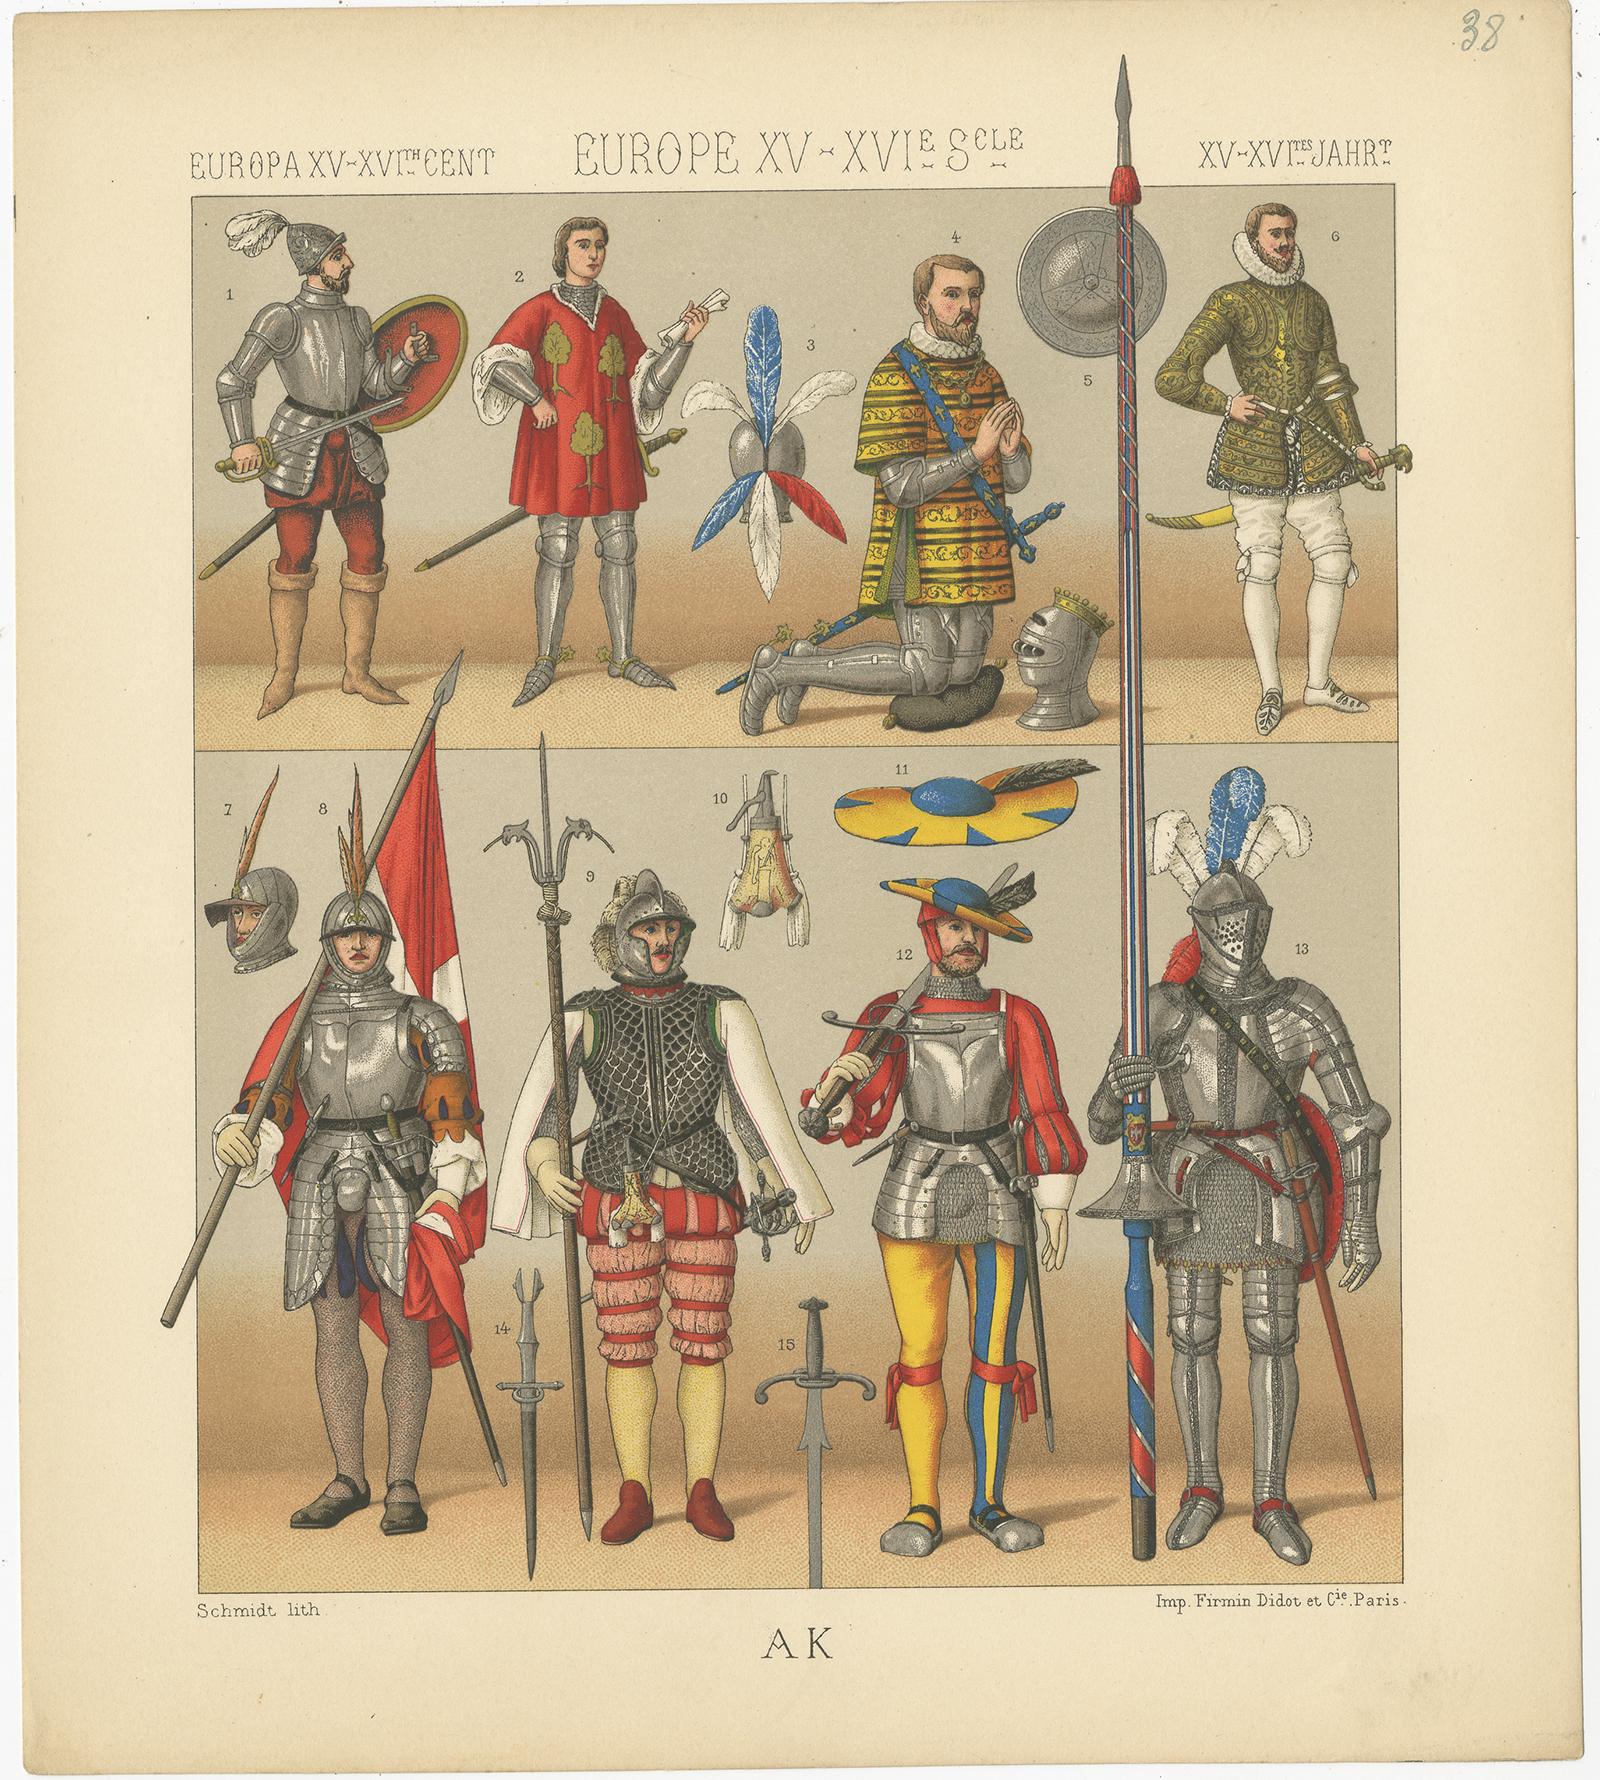 Antique print titled 'Europa XV, XVIth Cent - Europe XV, XVIe Sele - Europa XV, XVItes Jahr'. Chromolithograph of European 15th-16th century armament. This print originates from 'Le Costume Historique' by M.A. Racinet. Published, circa 1880.